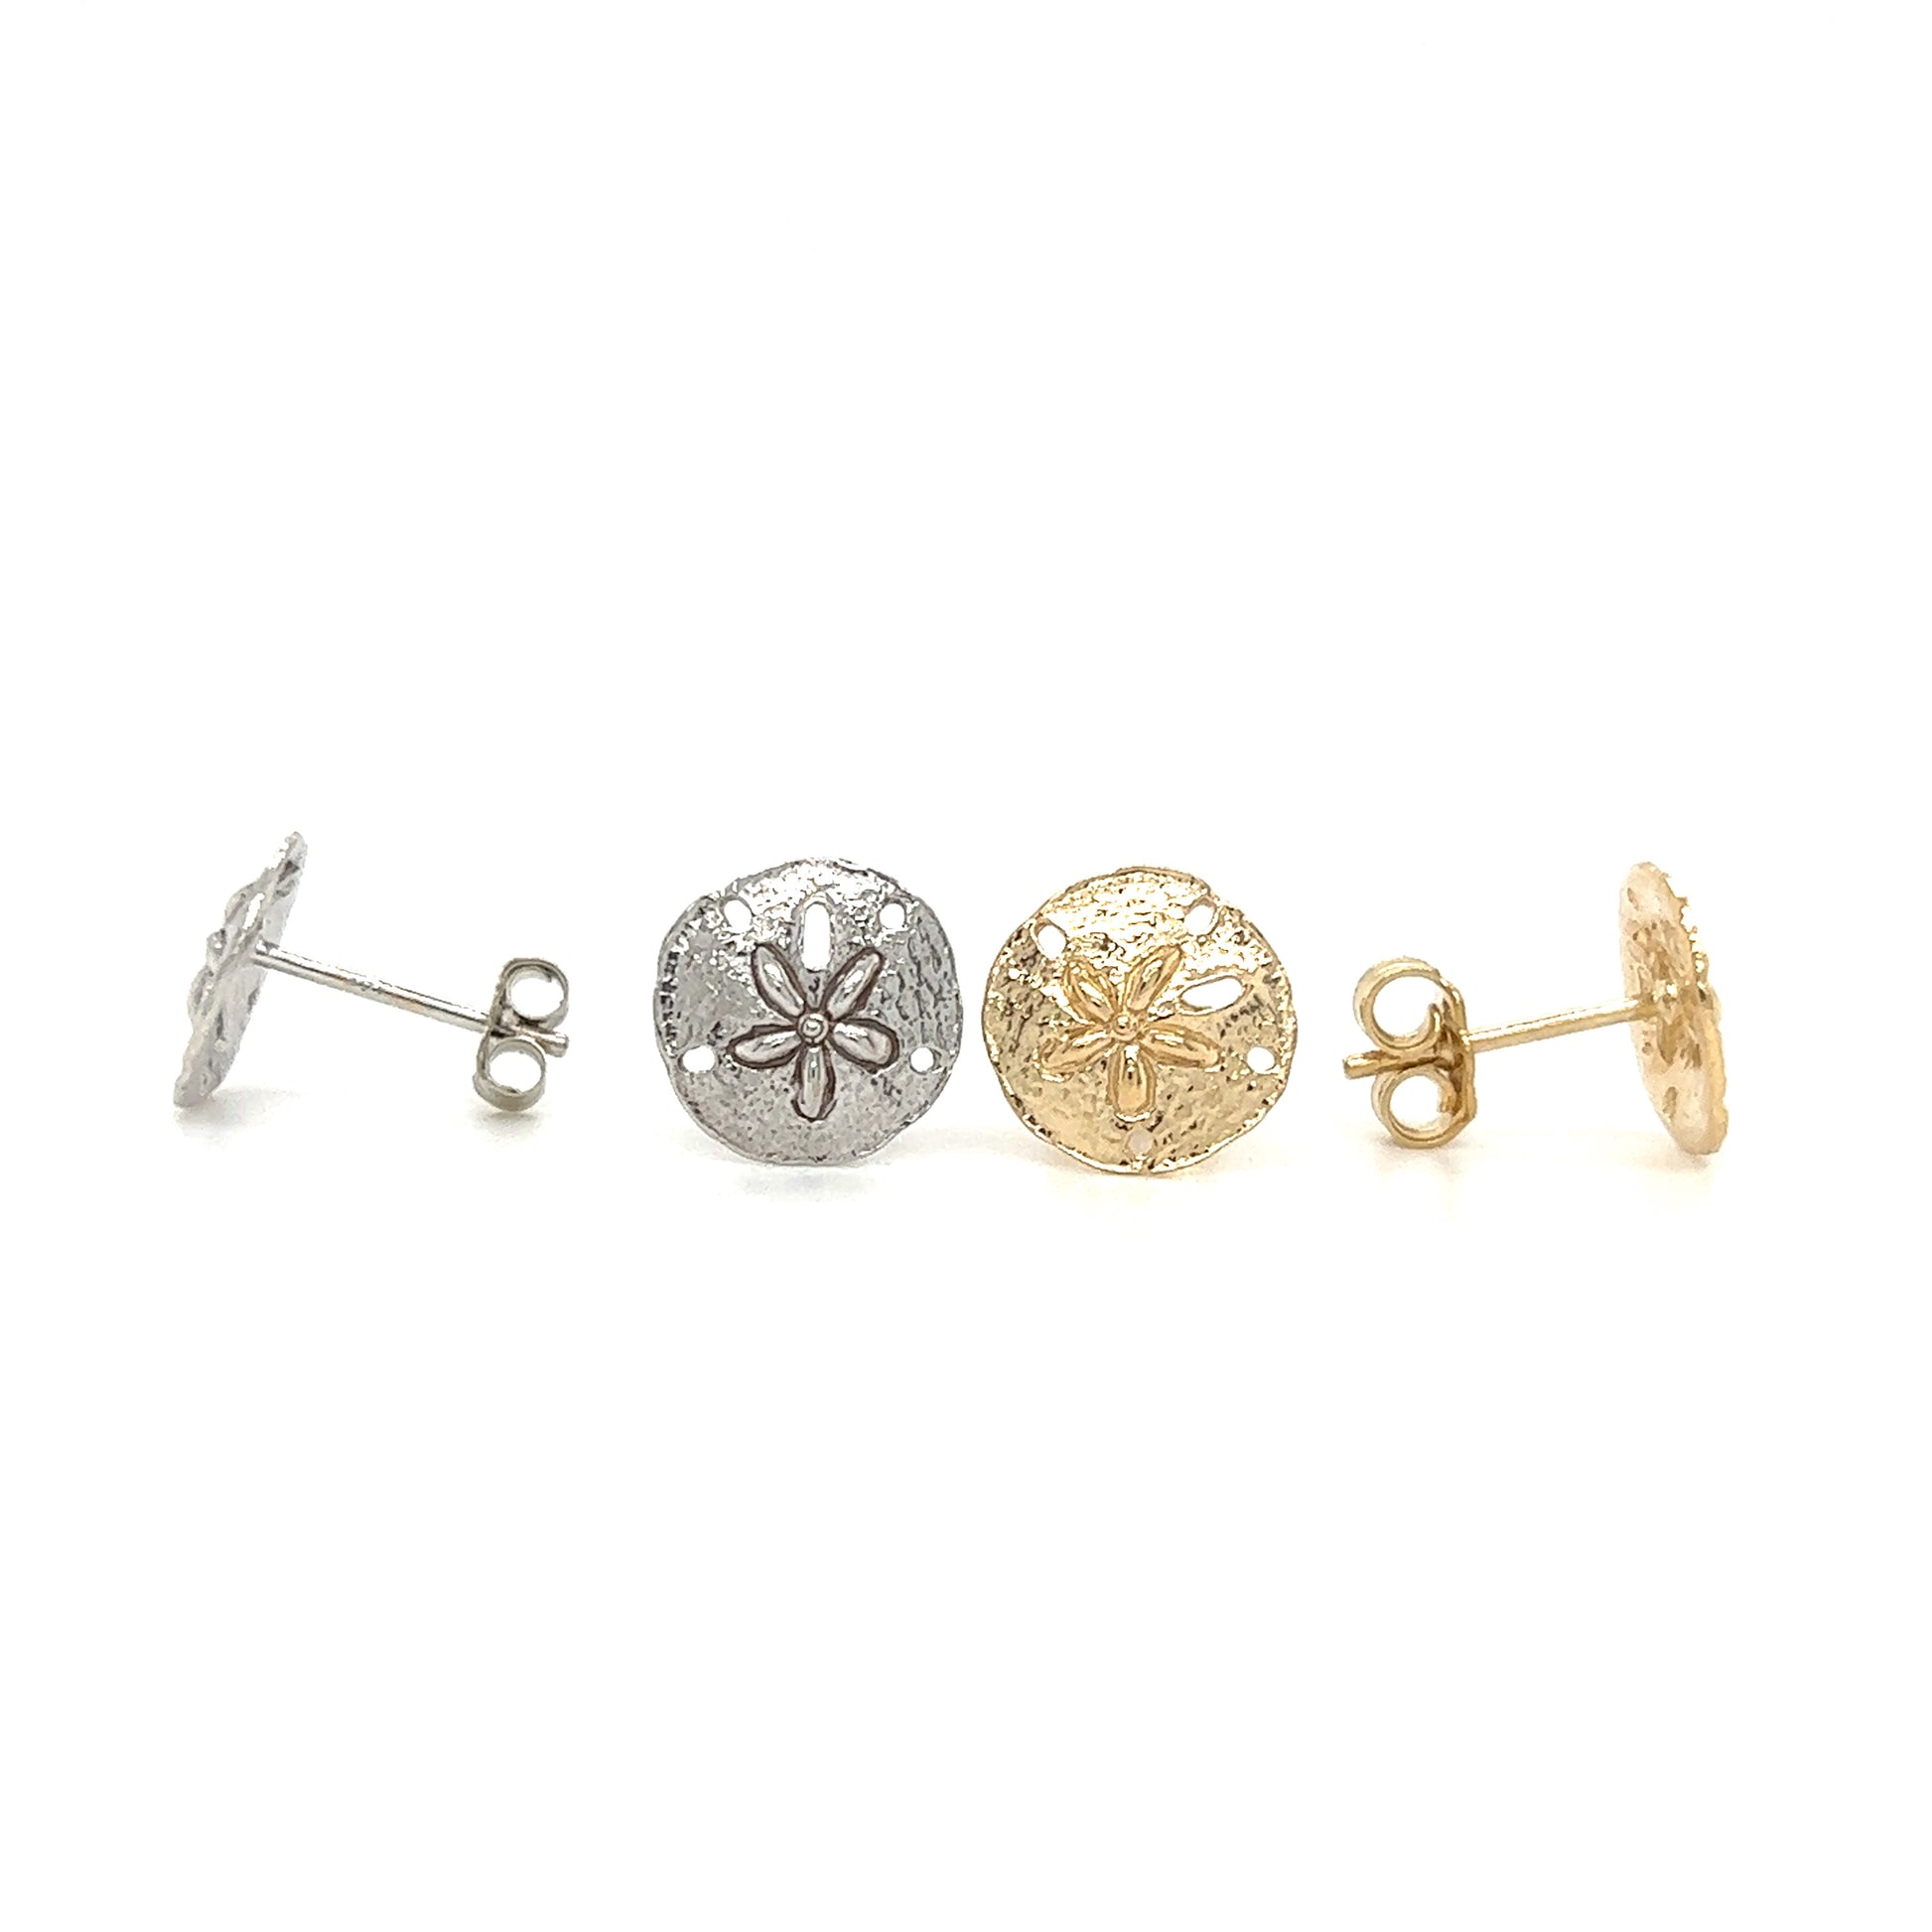 Sand Dollar Stud Earrings in 14K Gold Front and Side View